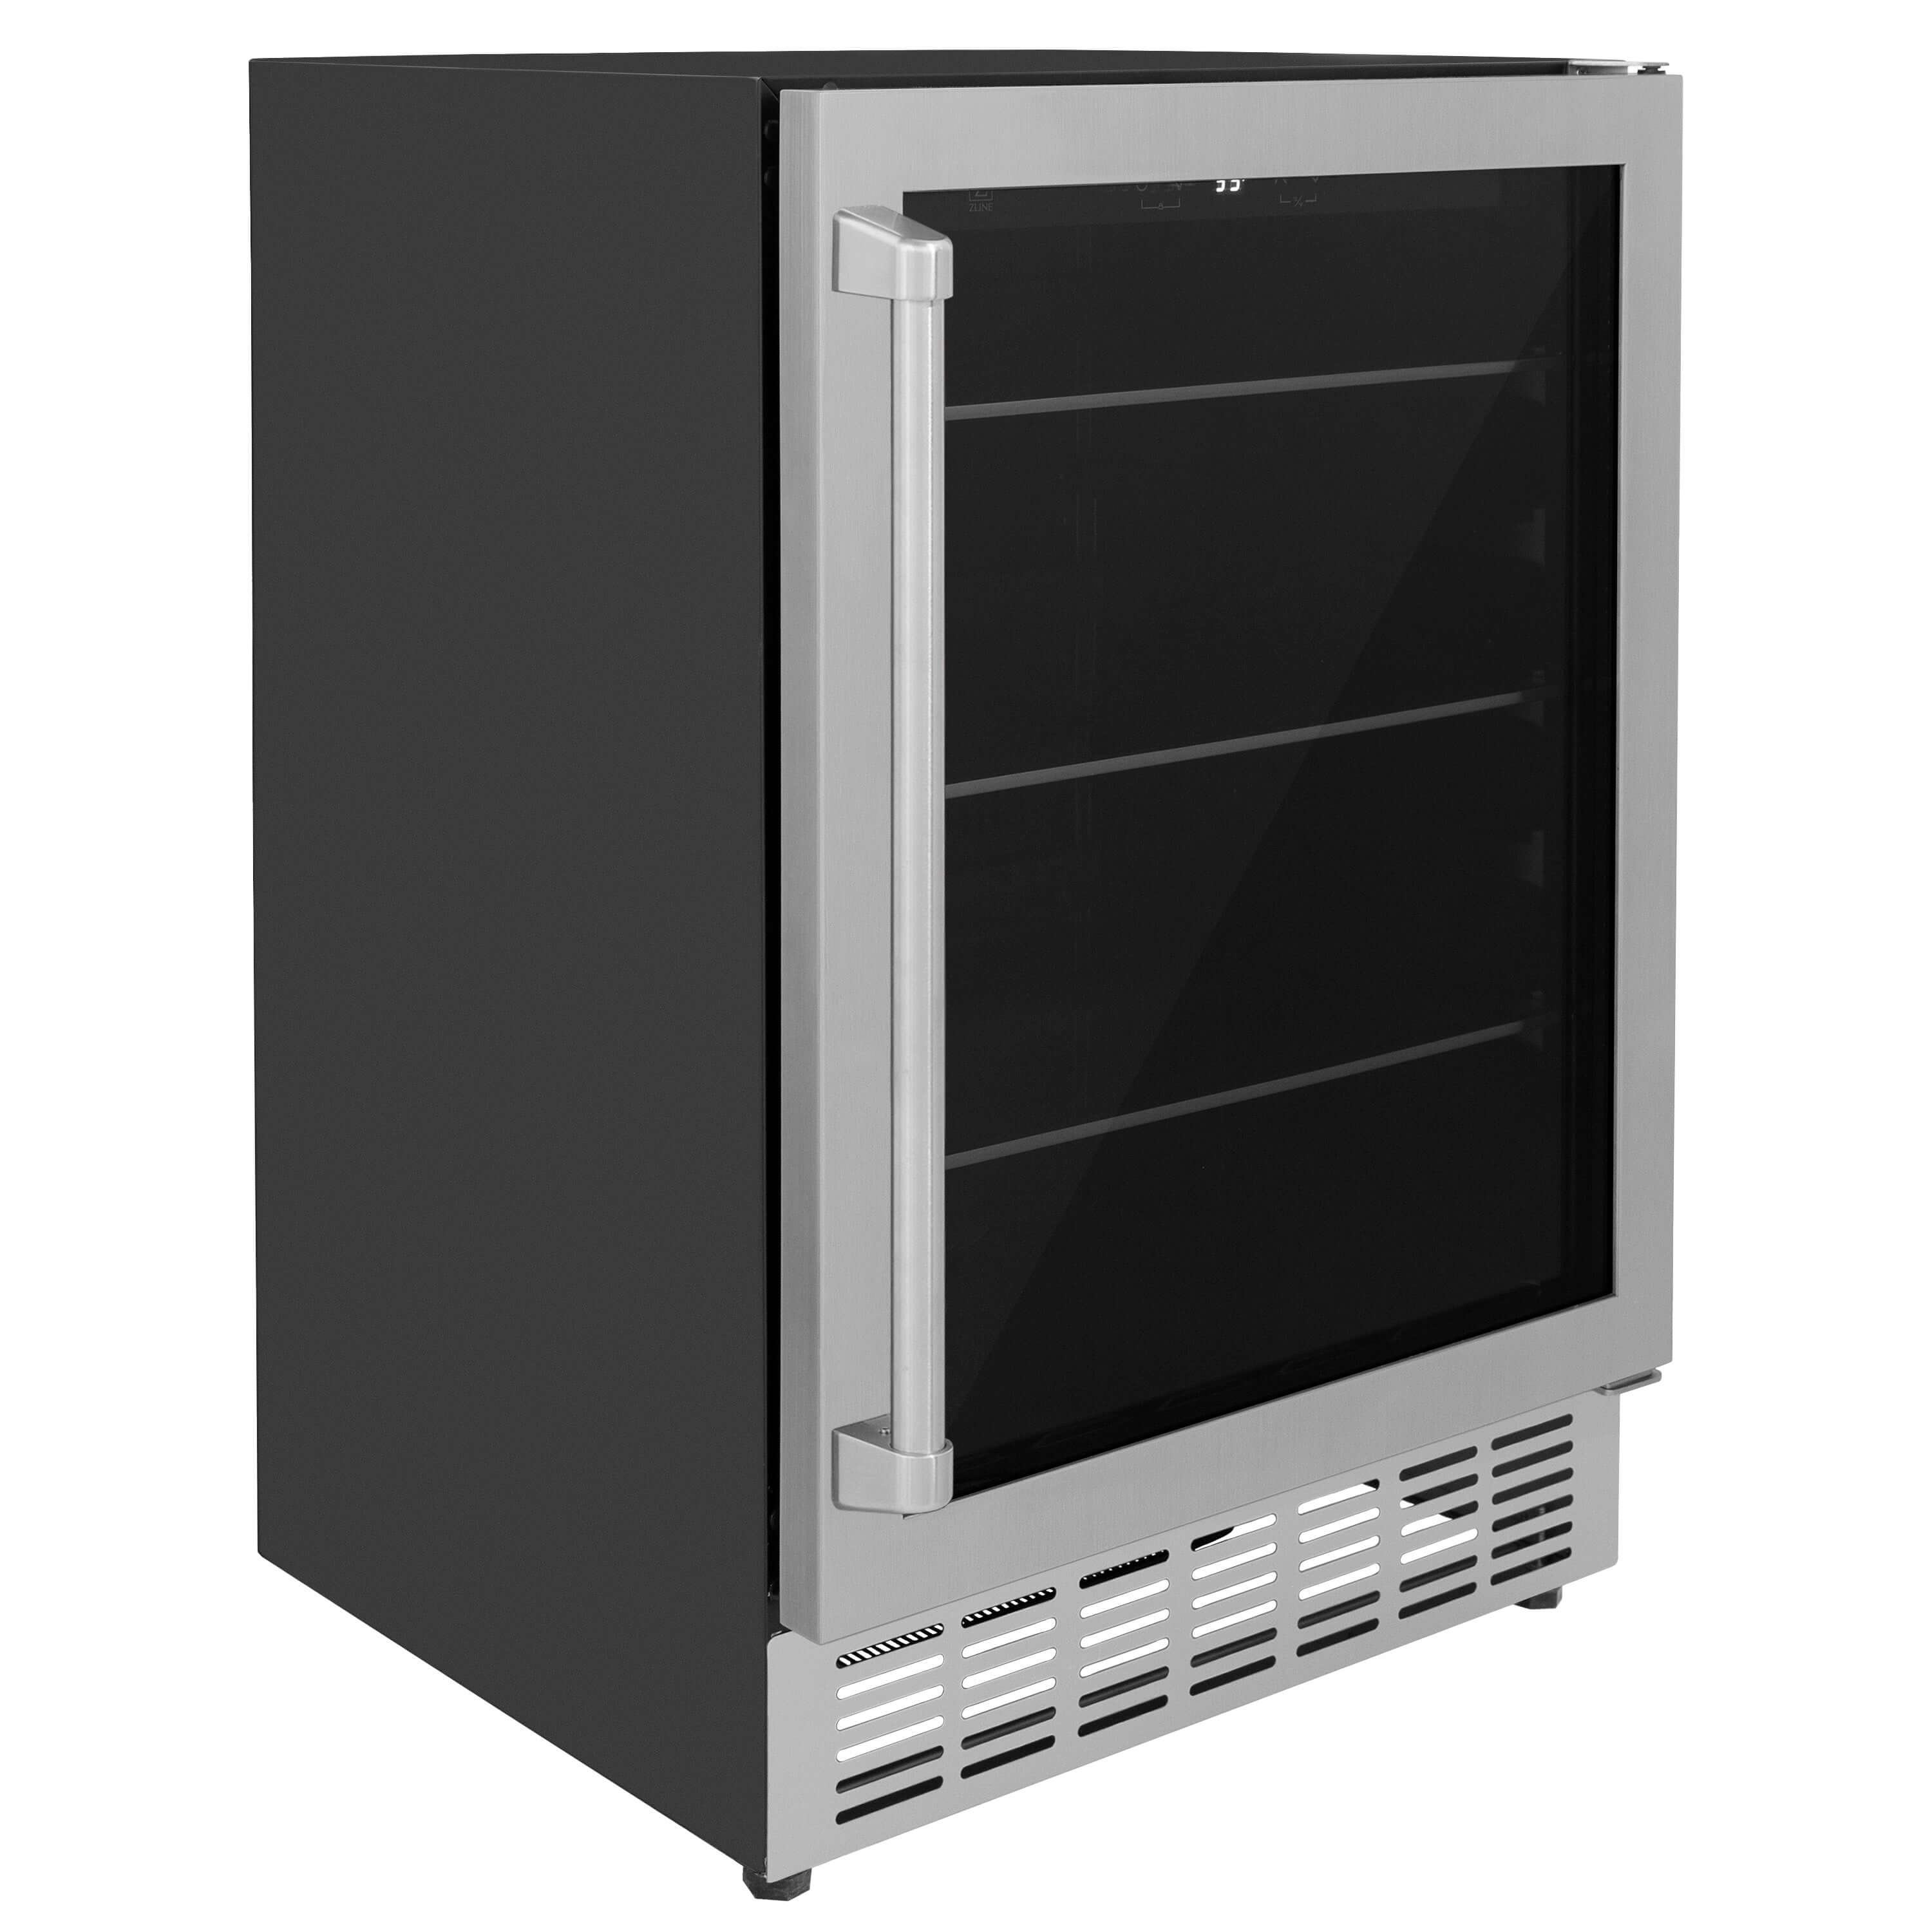 ZLINE 24 in. Monument 154 Can Beverage Fridge in Stainless Steel (RBV-US-24) side, closed.